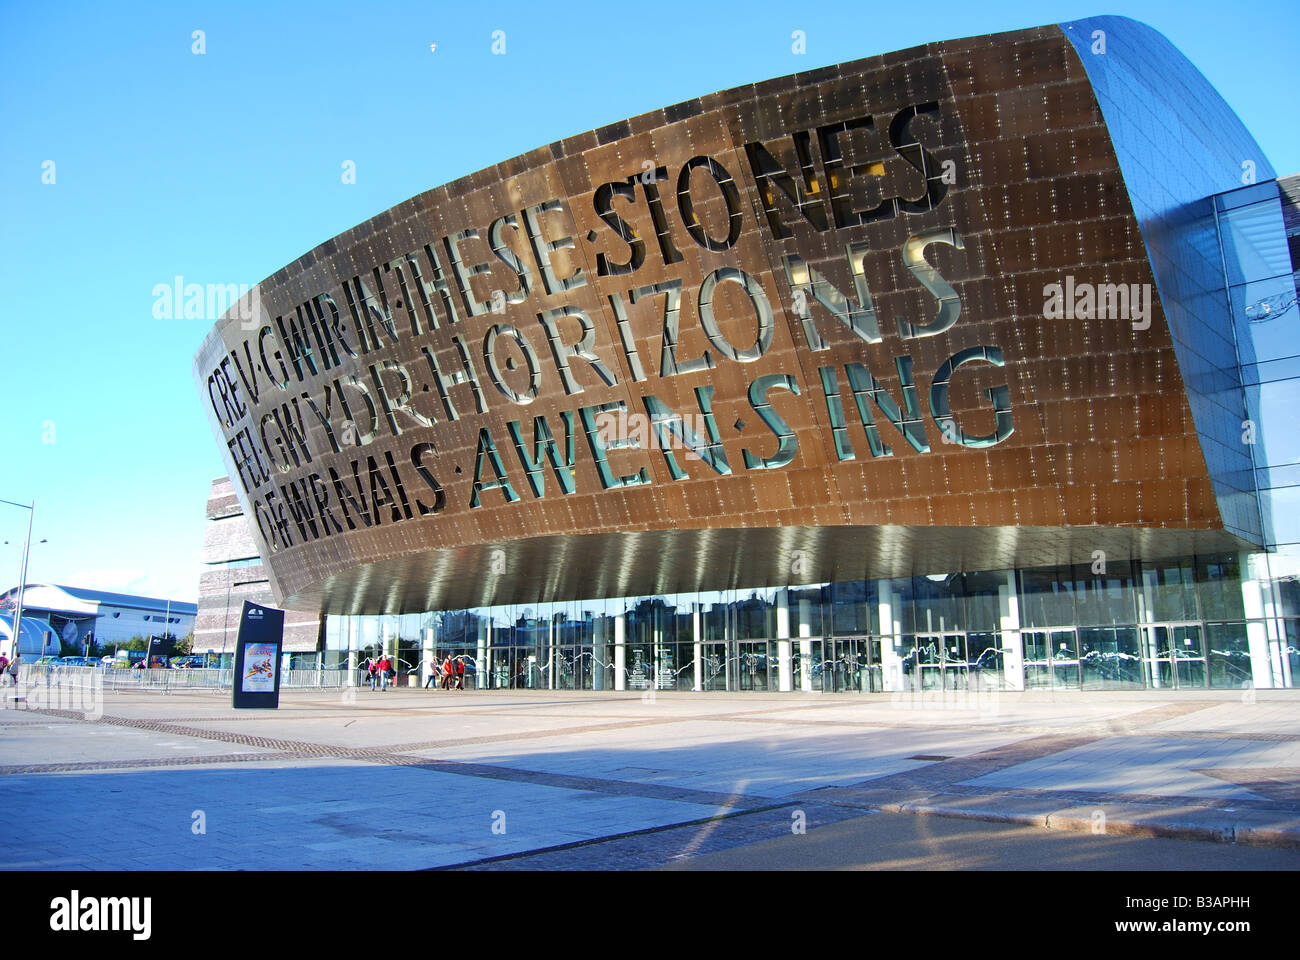 Wales Millennium Centre, Cardiff, Cardiff Bay, South Glamorgan, Wales, Royaume-Uni Banque D'Images